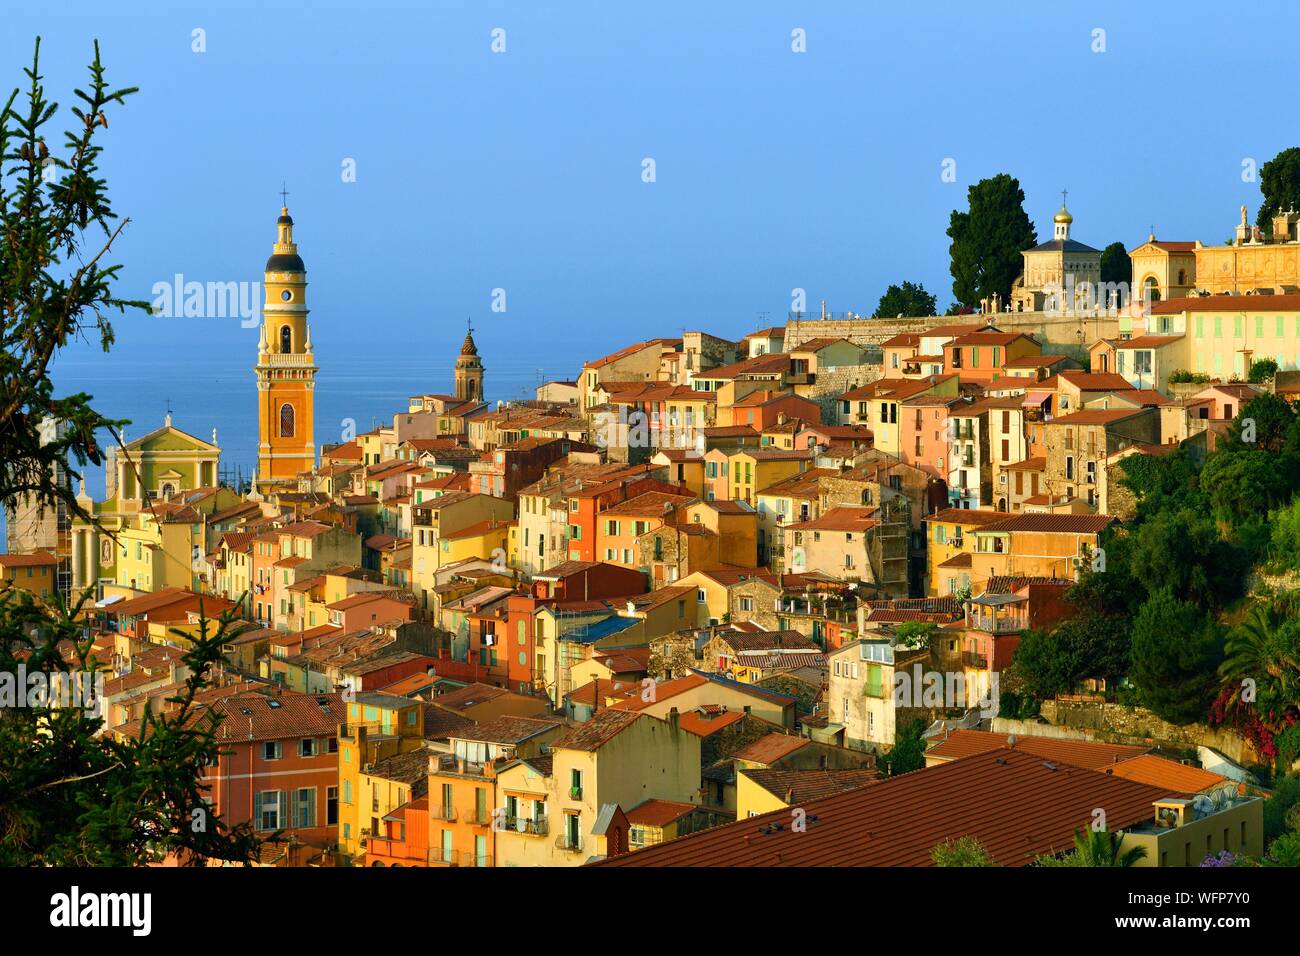 France, Alpes Maritimes, Menton, the old town dominated by the Saint Michel Archange basilica Stock Photo